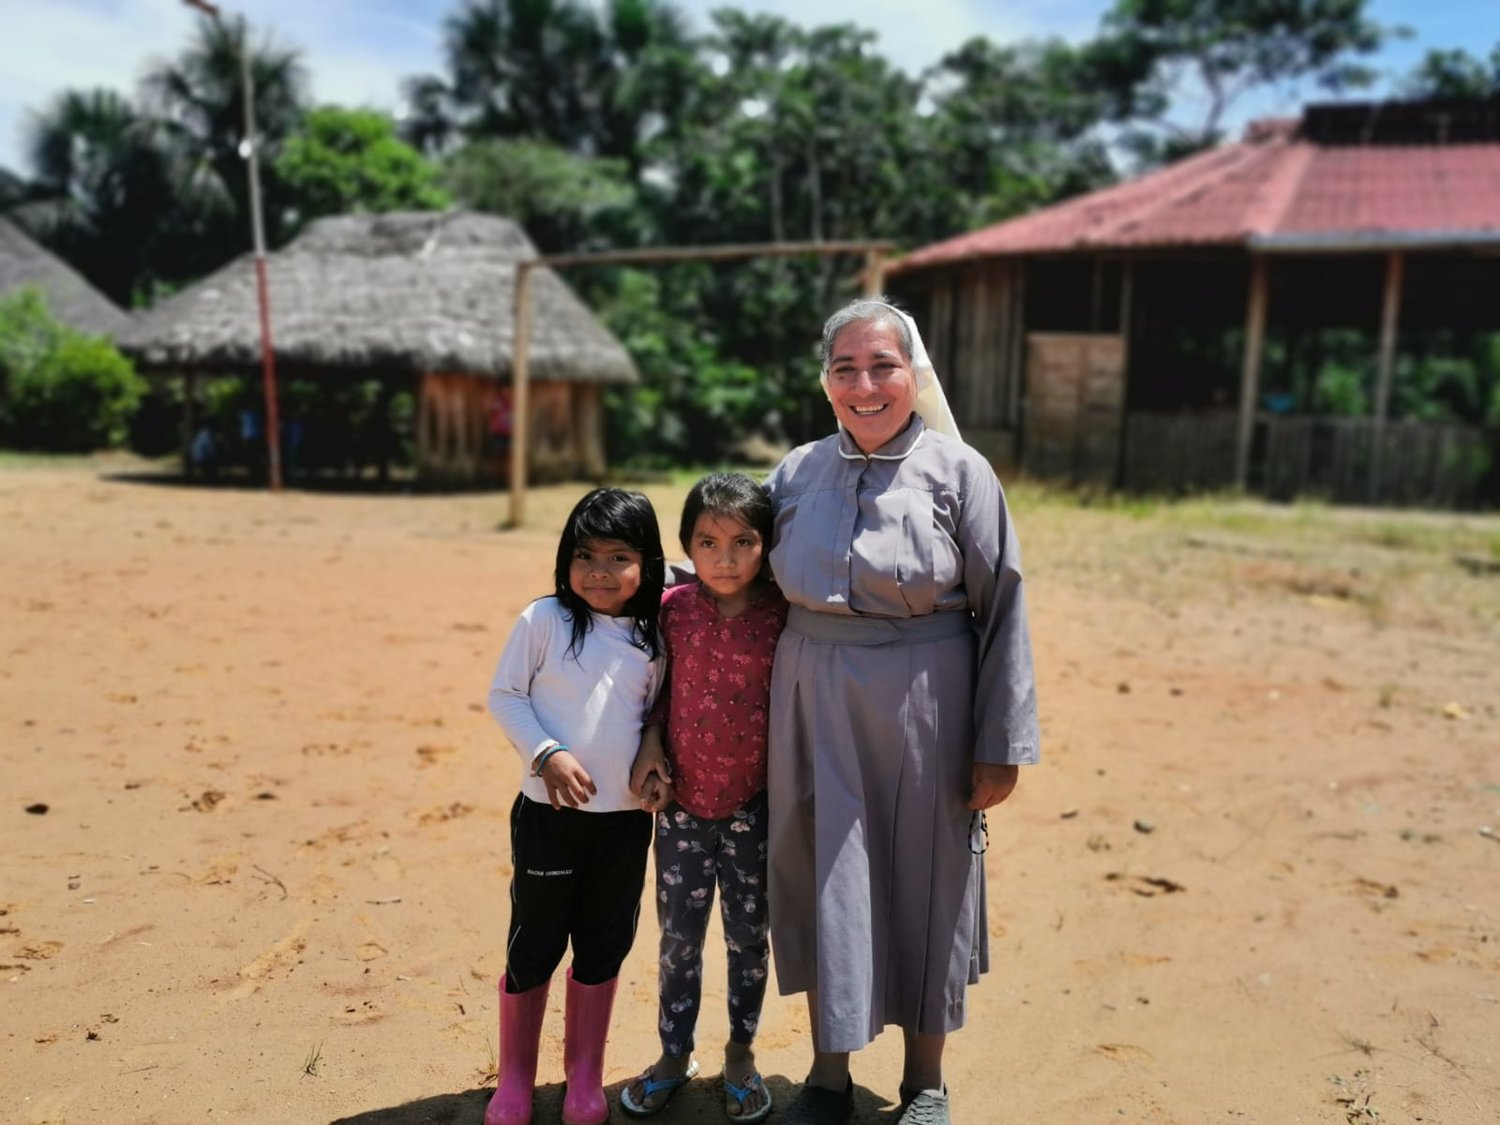 Sister Rosa Elena Pico, a member of the Missionaries of Mary Co-Redemptrix, poses for a photo with children from the indigenous community of Sarayaku, Ecuador, Sept. 18, 2019. Sister Pico has worked and lived with the community since 2017 and occasionally leads the liturgy of the word in the absence of a priest.